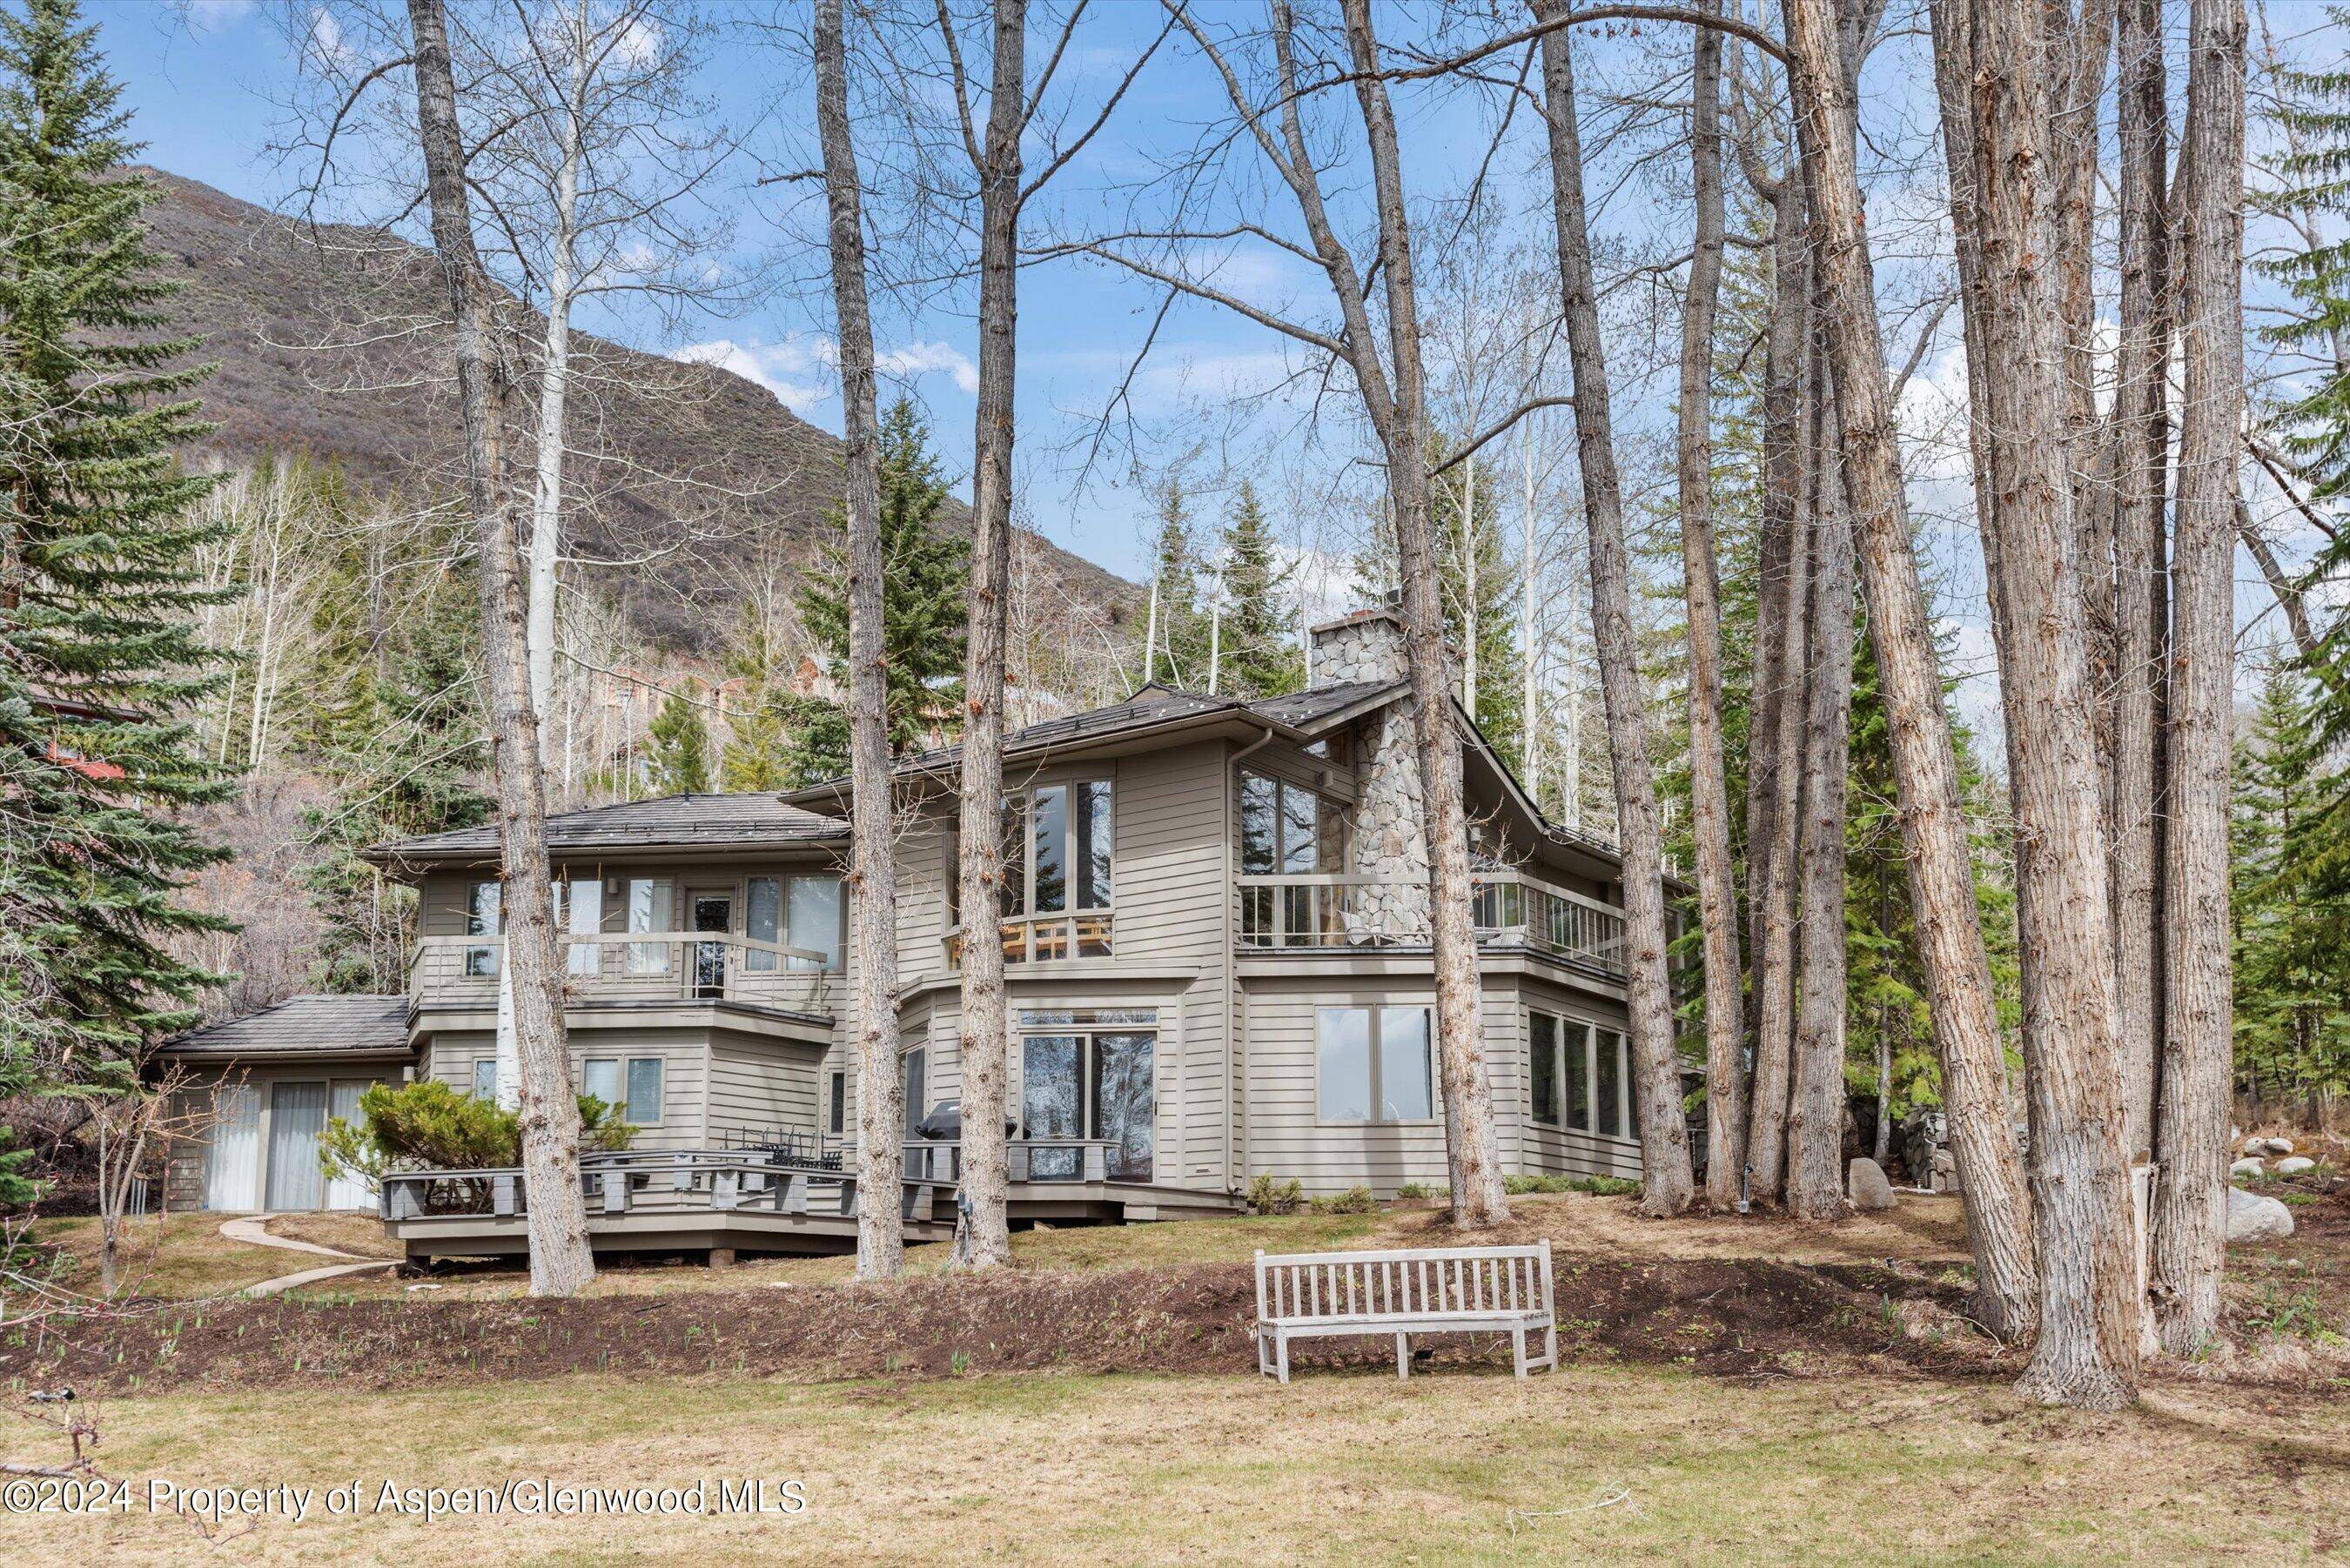 Situated in one of Aspen's most coveted enclaves, this exclusive residence on Red Mountain offers unparalleled privacy and tranquility while being just moments away from the vibrant energy of downtown ...